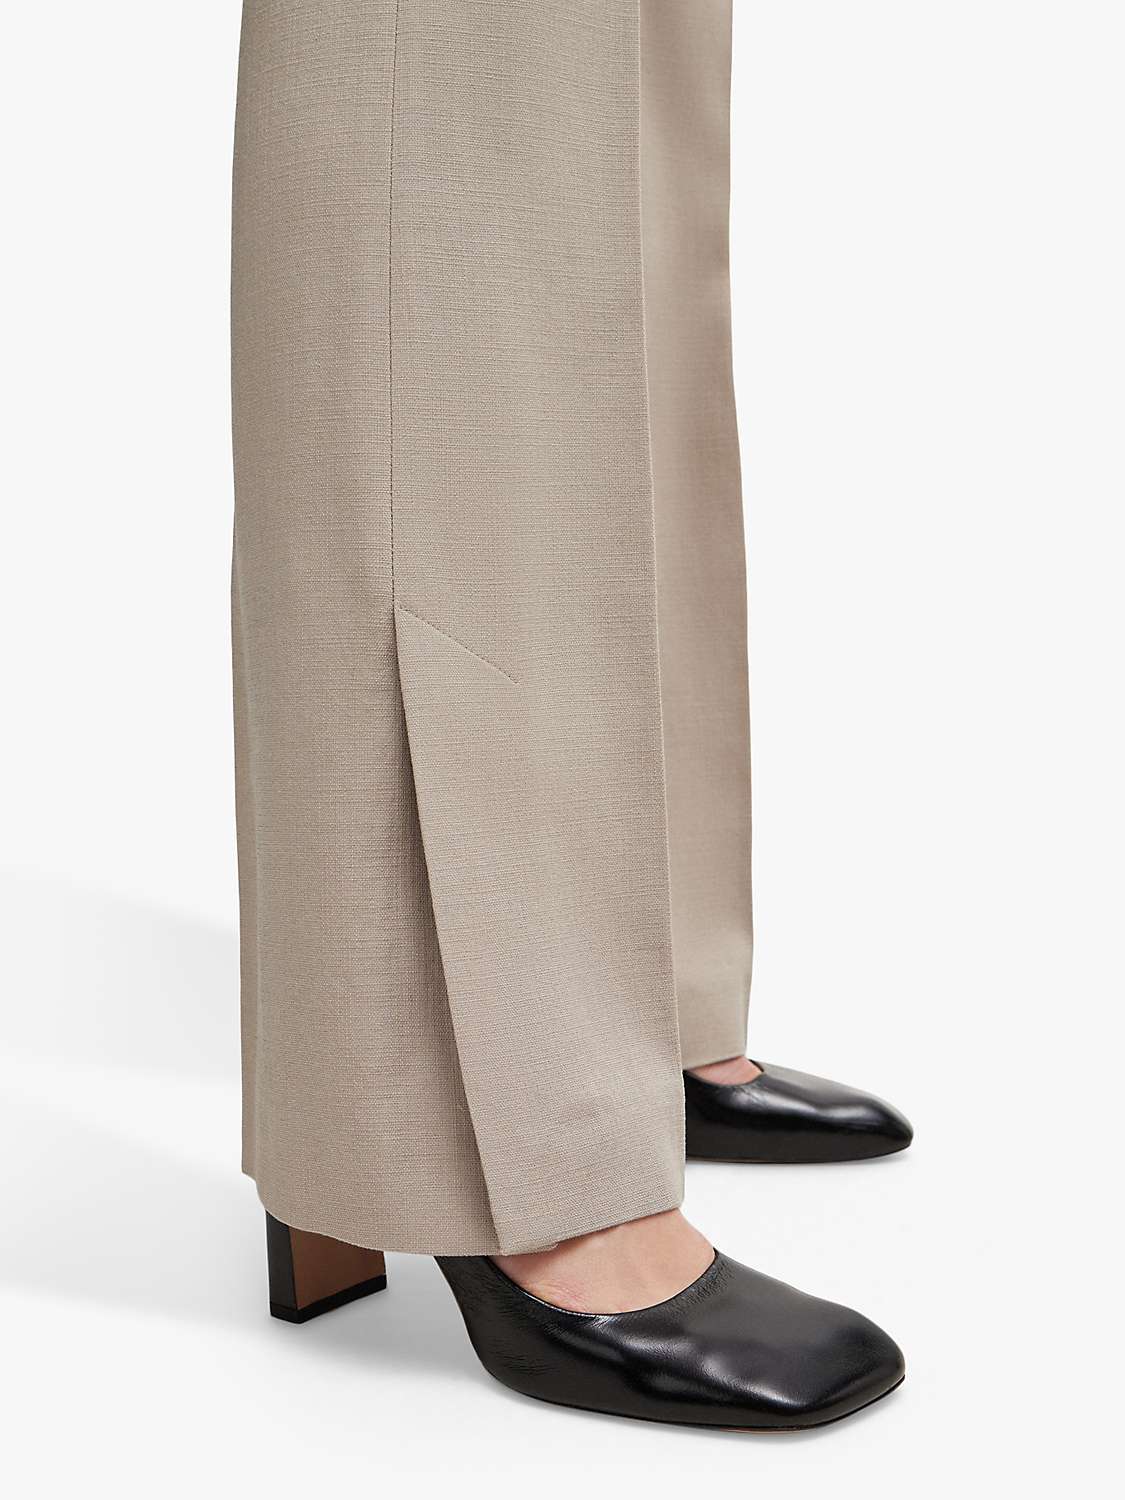 Buy BOSS Terela Tailored Suit Trousers, Taupe Online at johnlewis.com